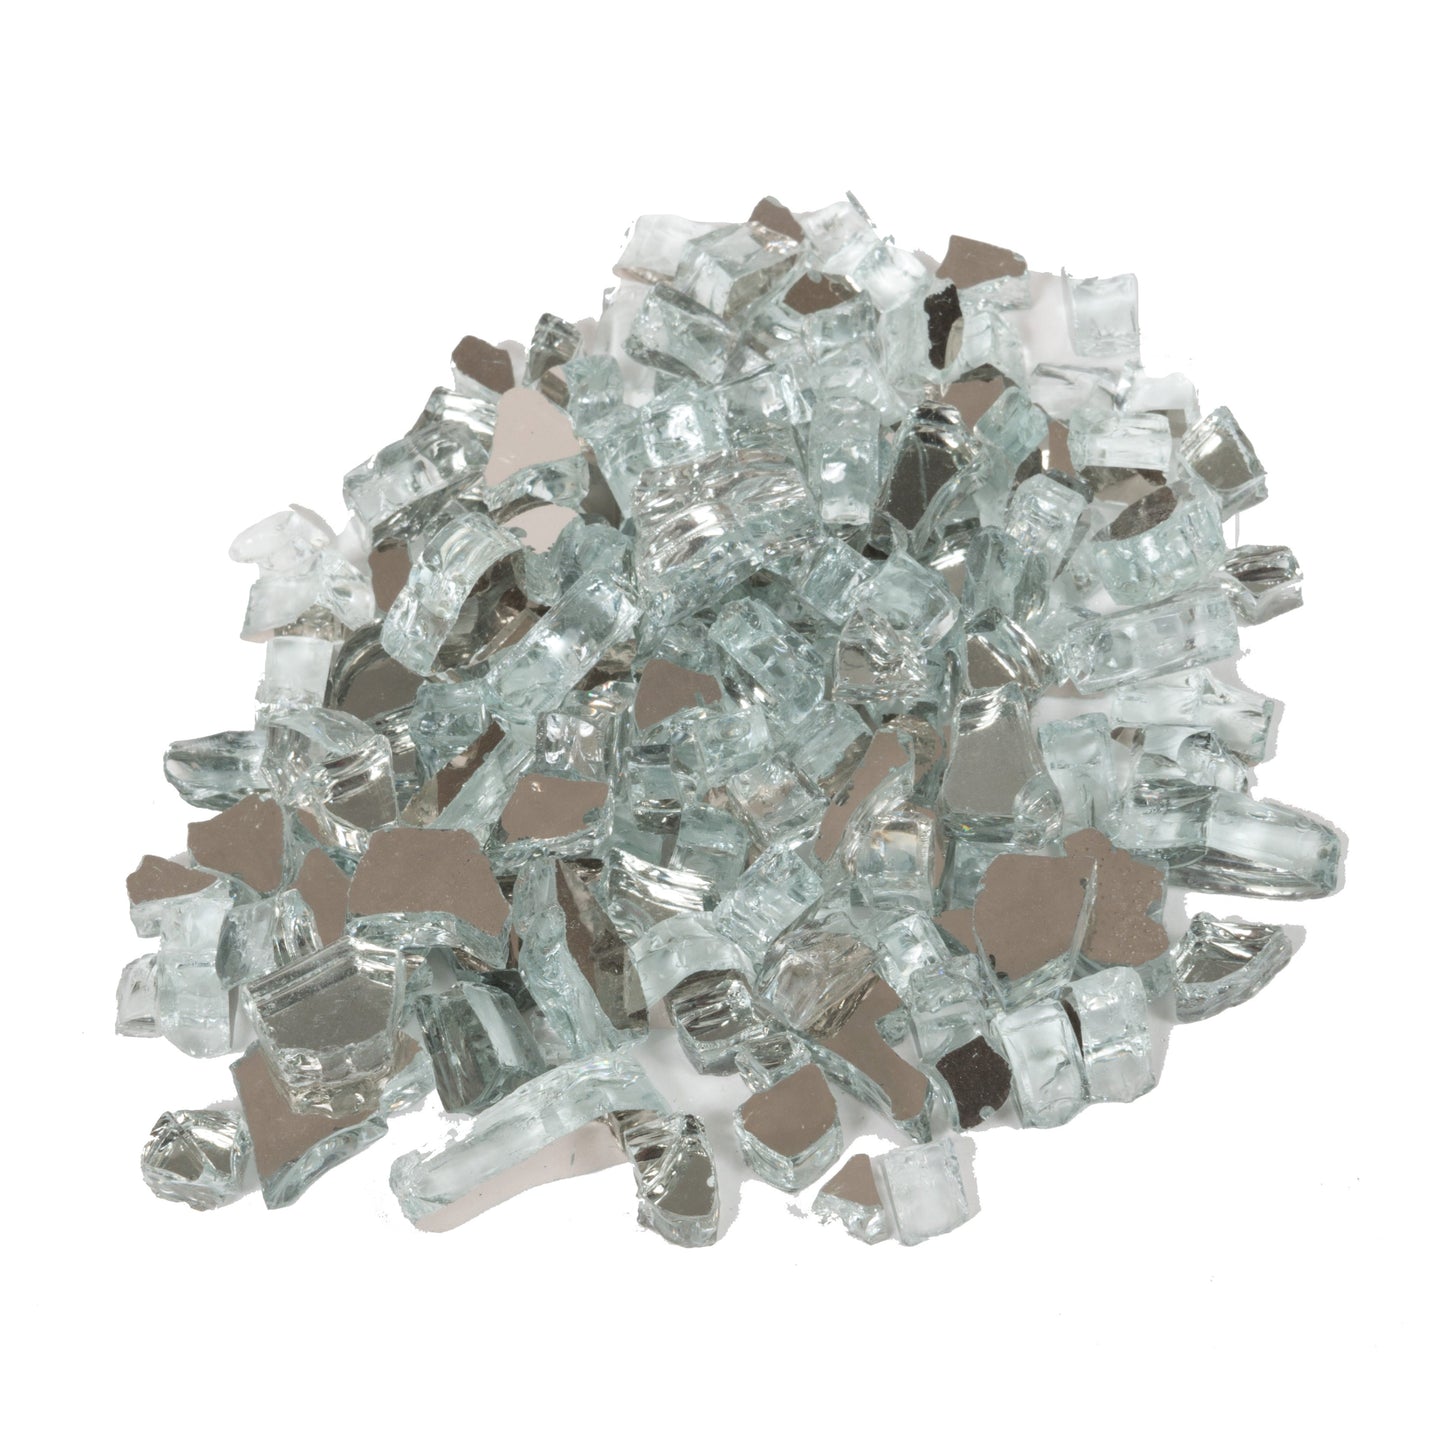 Tempered Glass Reflective Fire Glass 1/4" Size